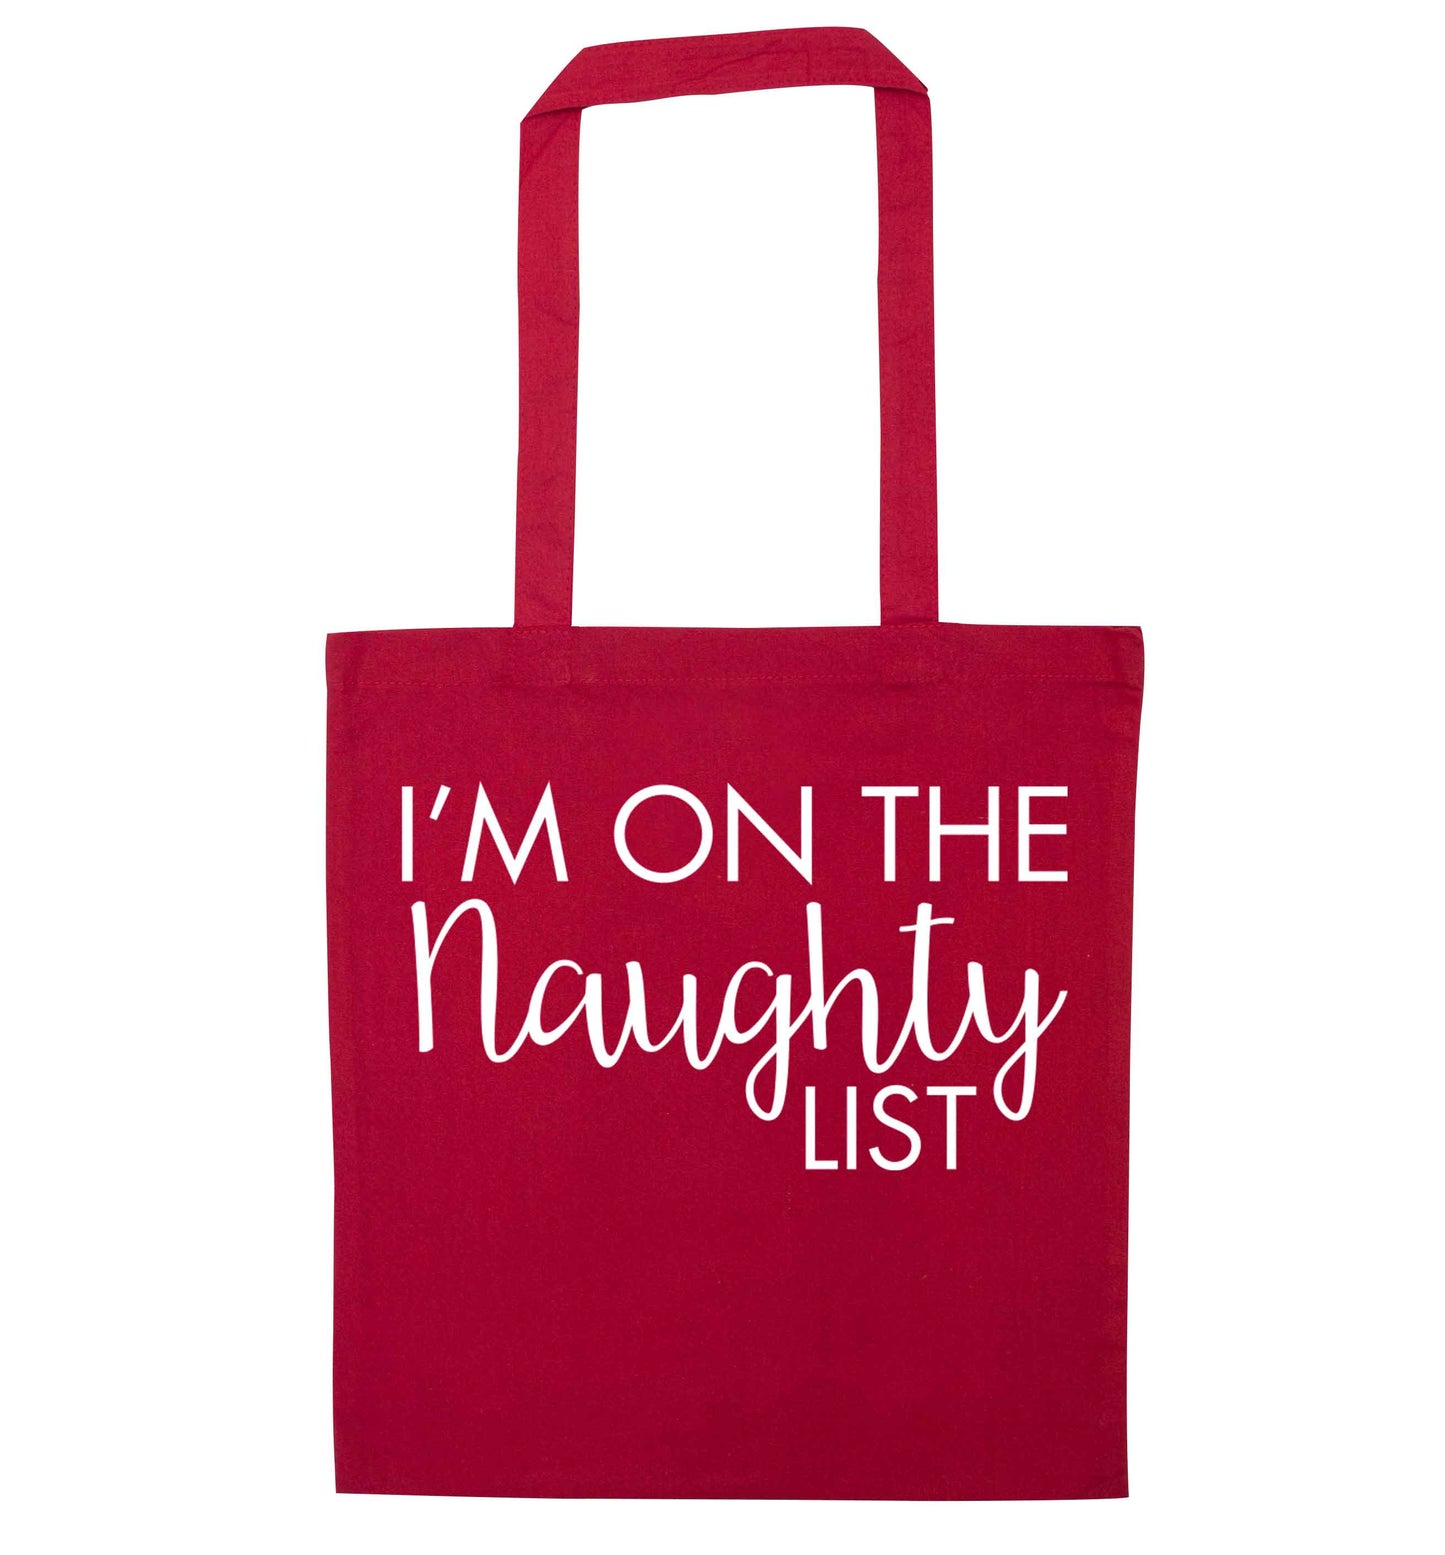 I'm on the naughty list red tote bag